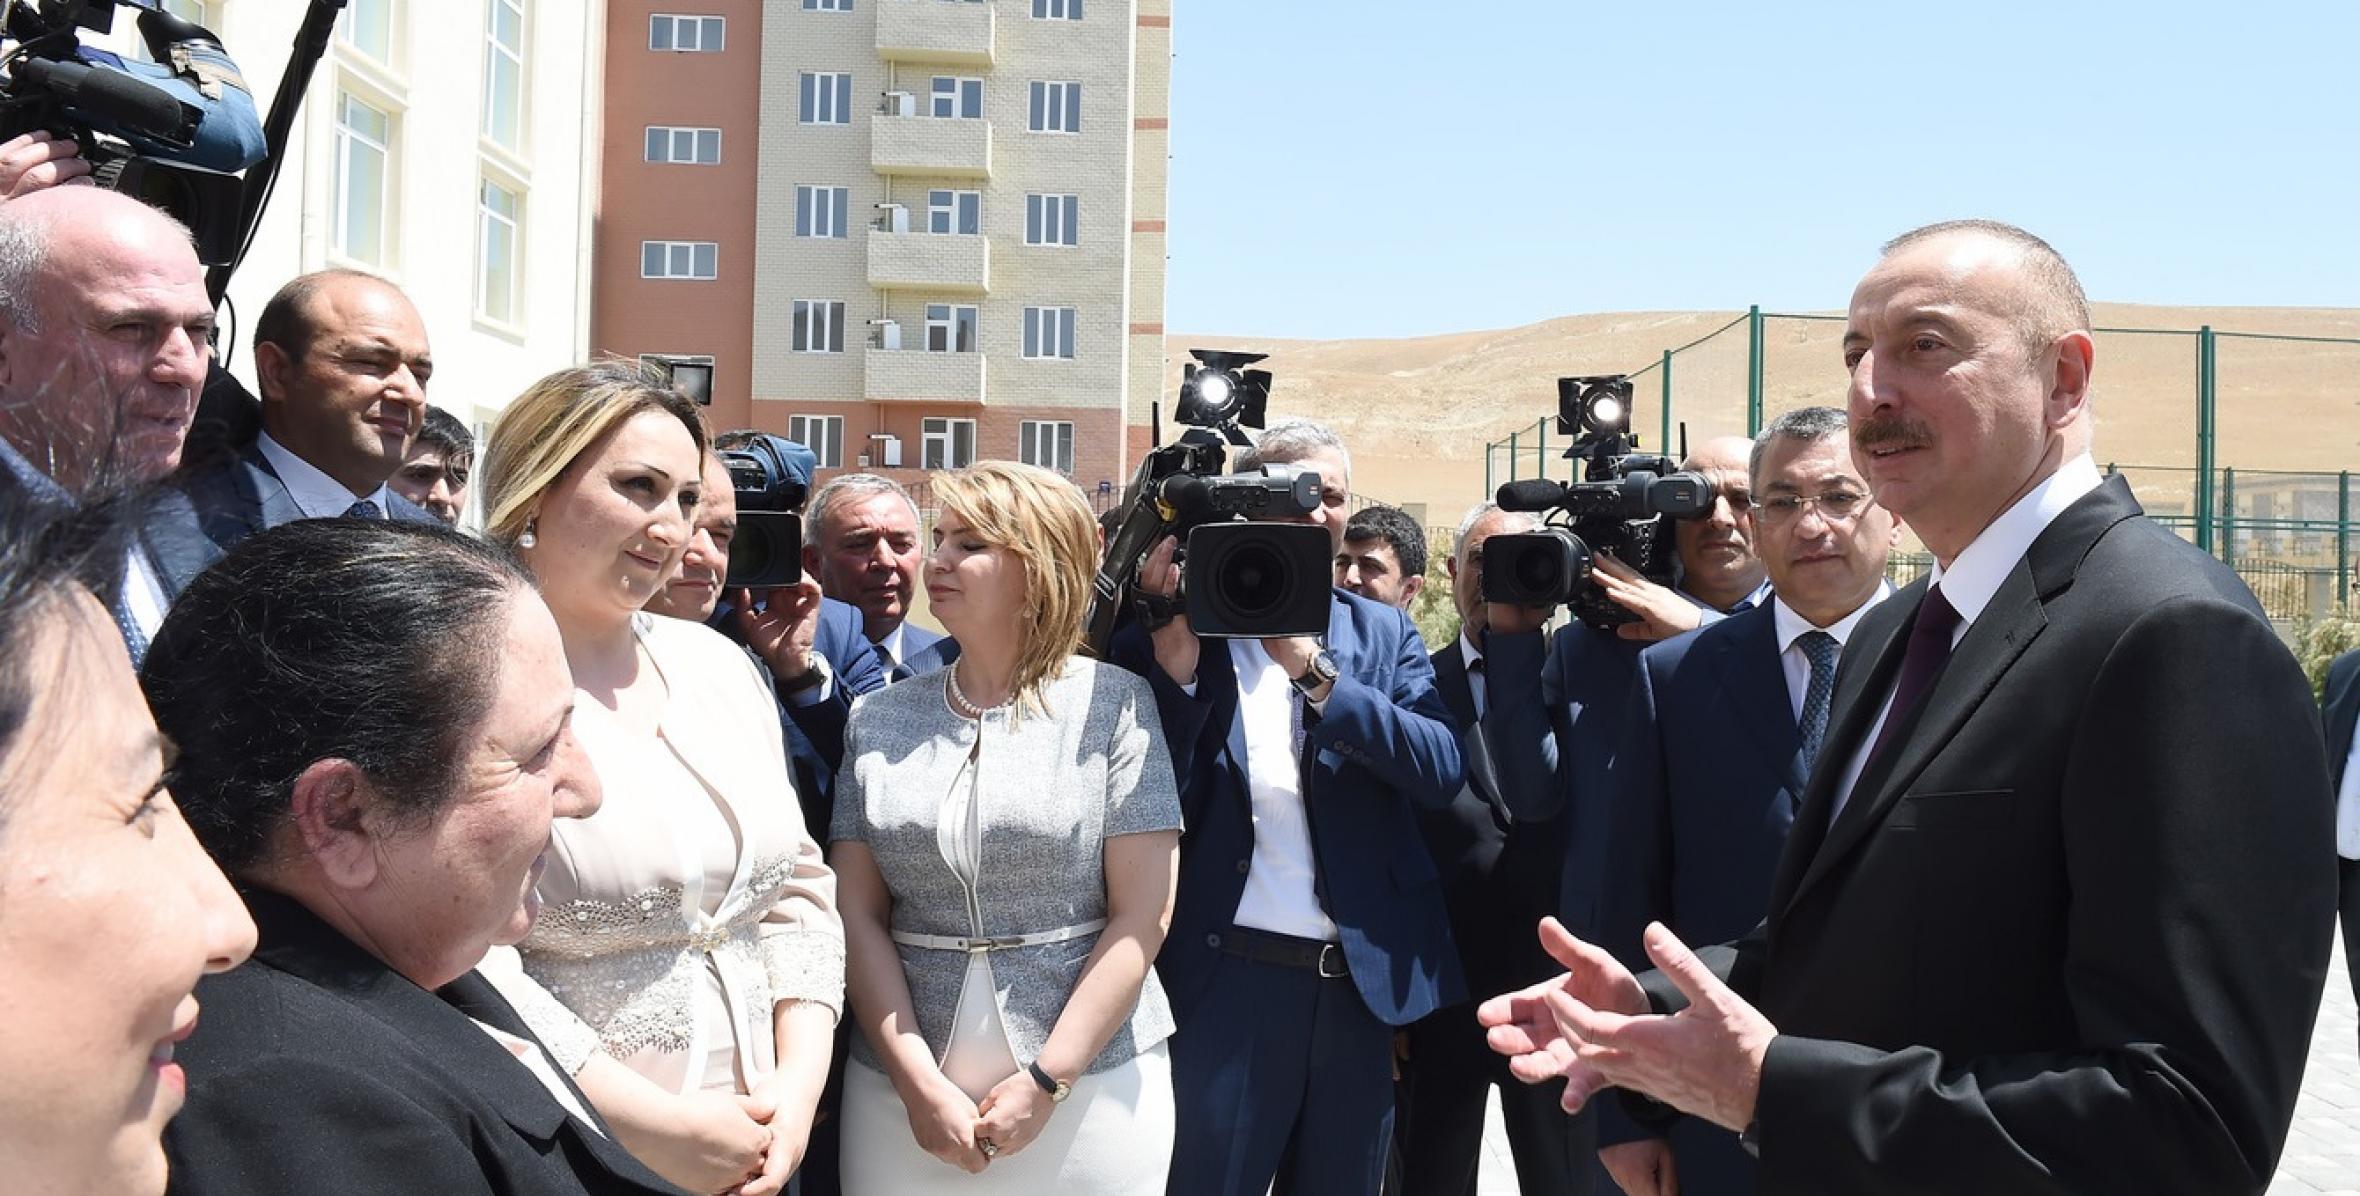 Speech by Ilham Aliyev at the opening of Gobu Park residential complex